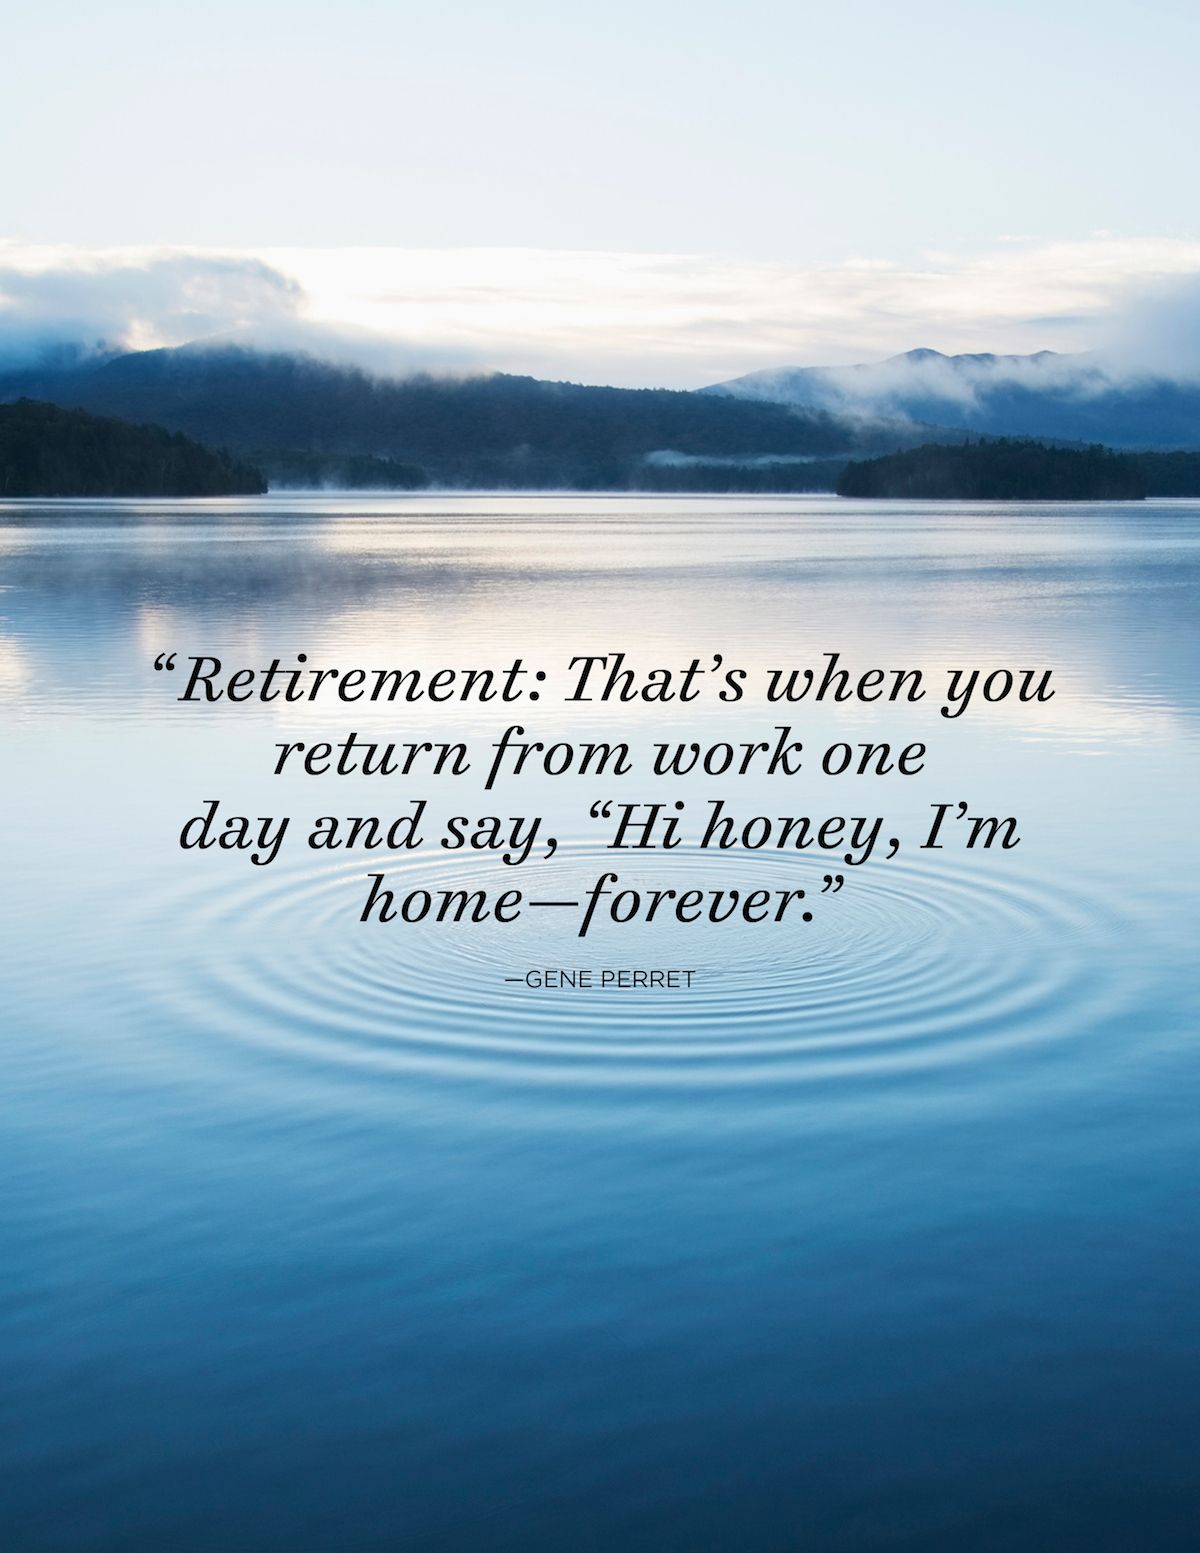 35 Great Retirement Quotes Funny And Inspirational Quotes About Retirement